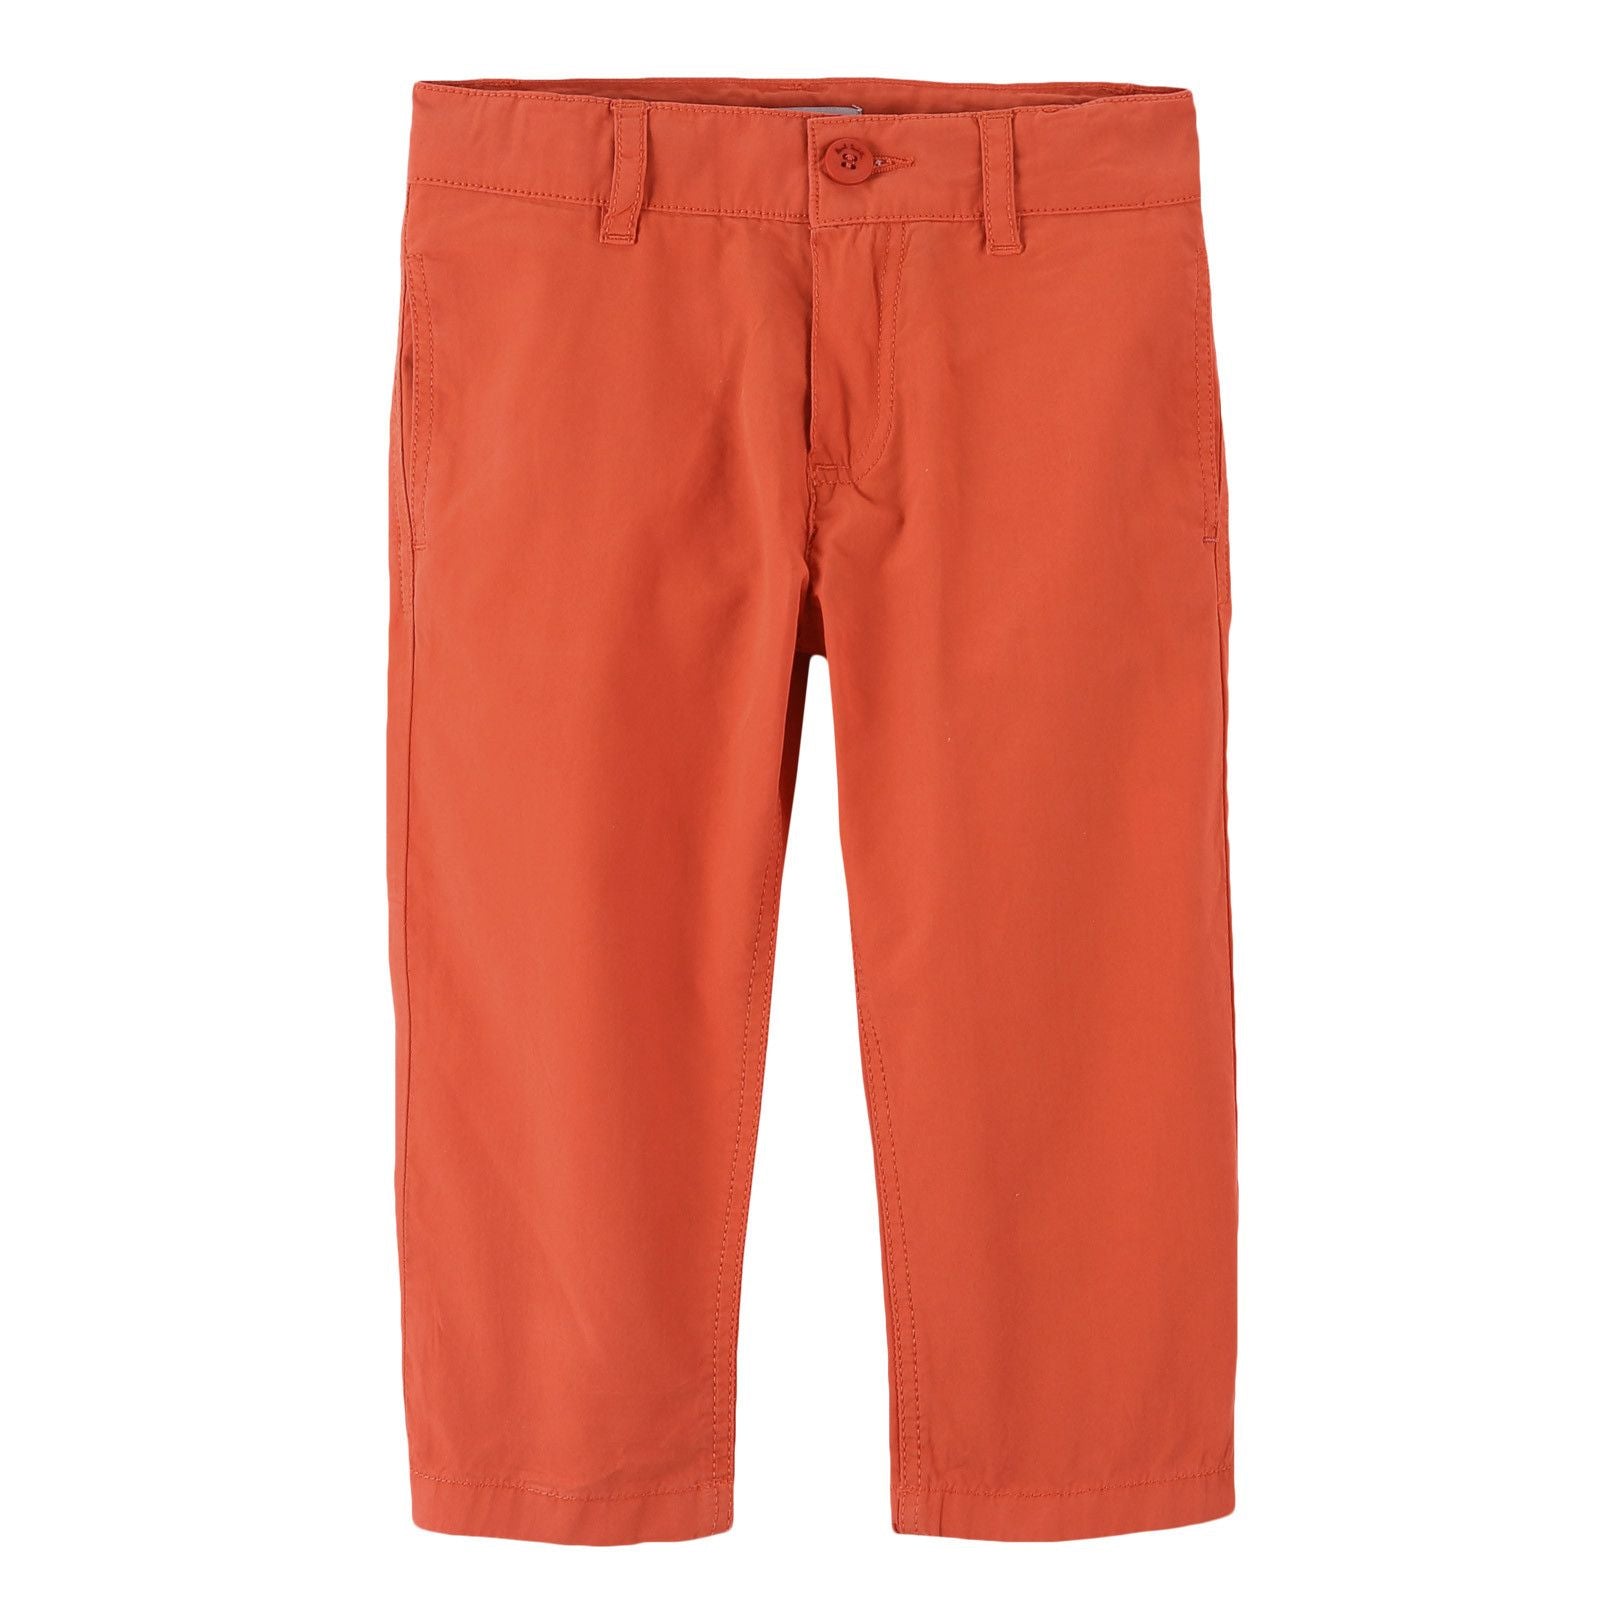 Boys Red Cotton Straight Cut Style Trousers - CÉMAROSE | Children's Fashion Store - 1